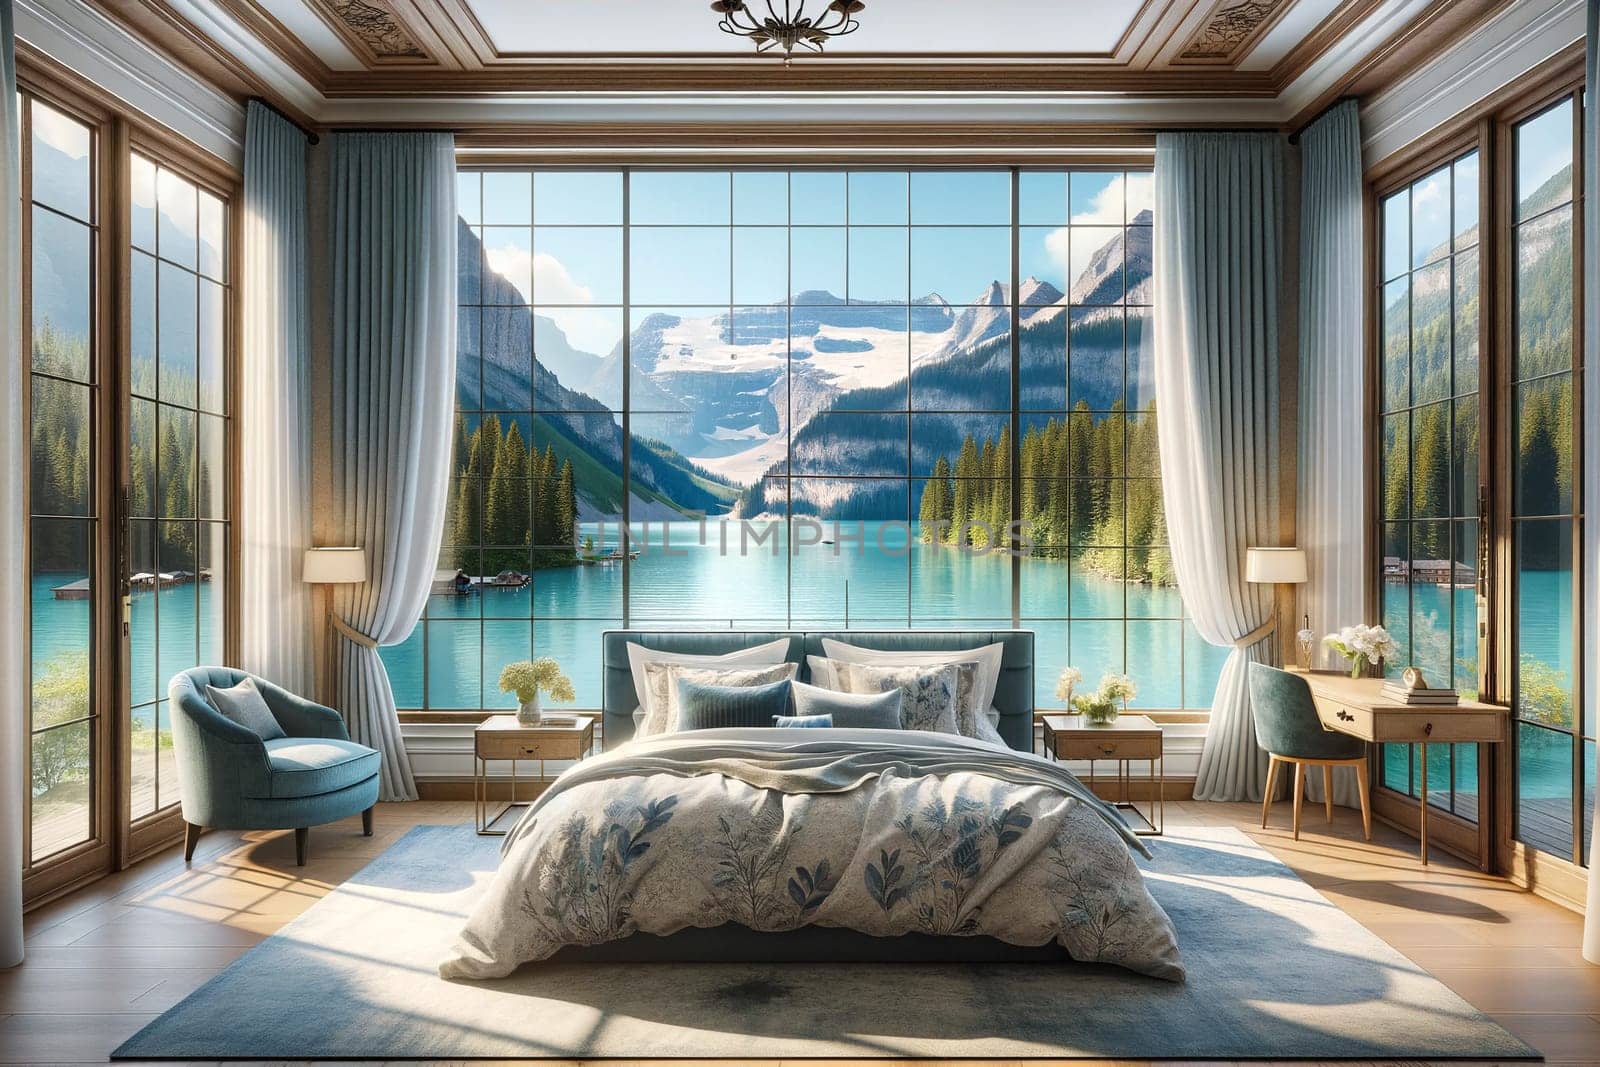 Bedroom interior with glass walls and views of the mountains and lake by Annado